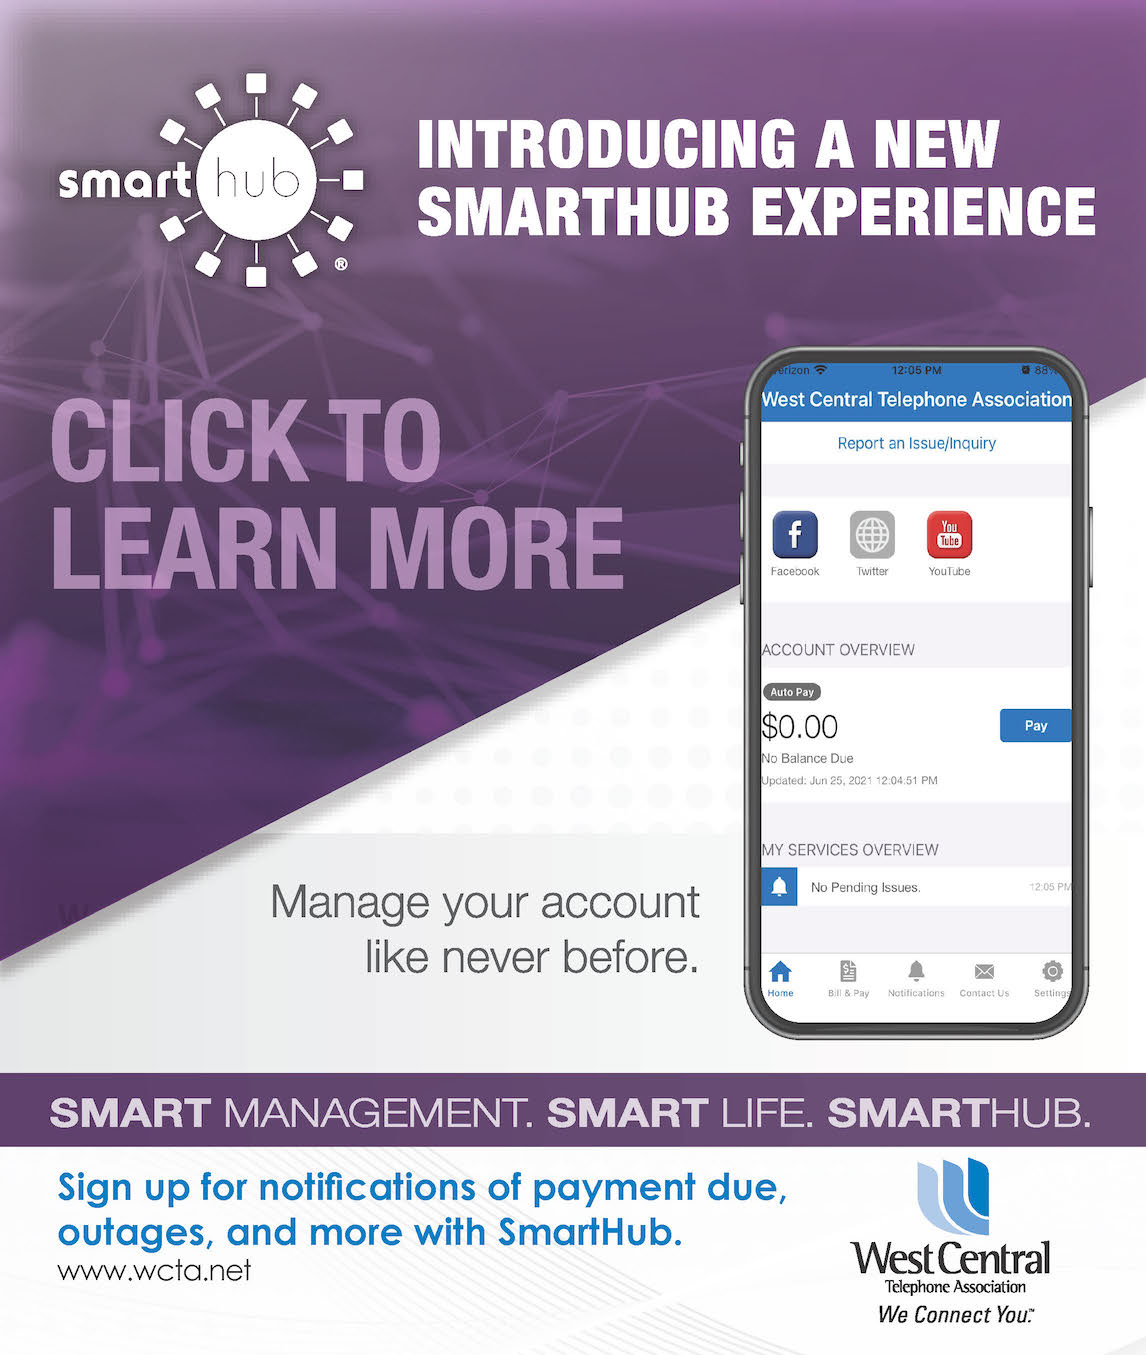 Smarthub Experience - Download Images to View